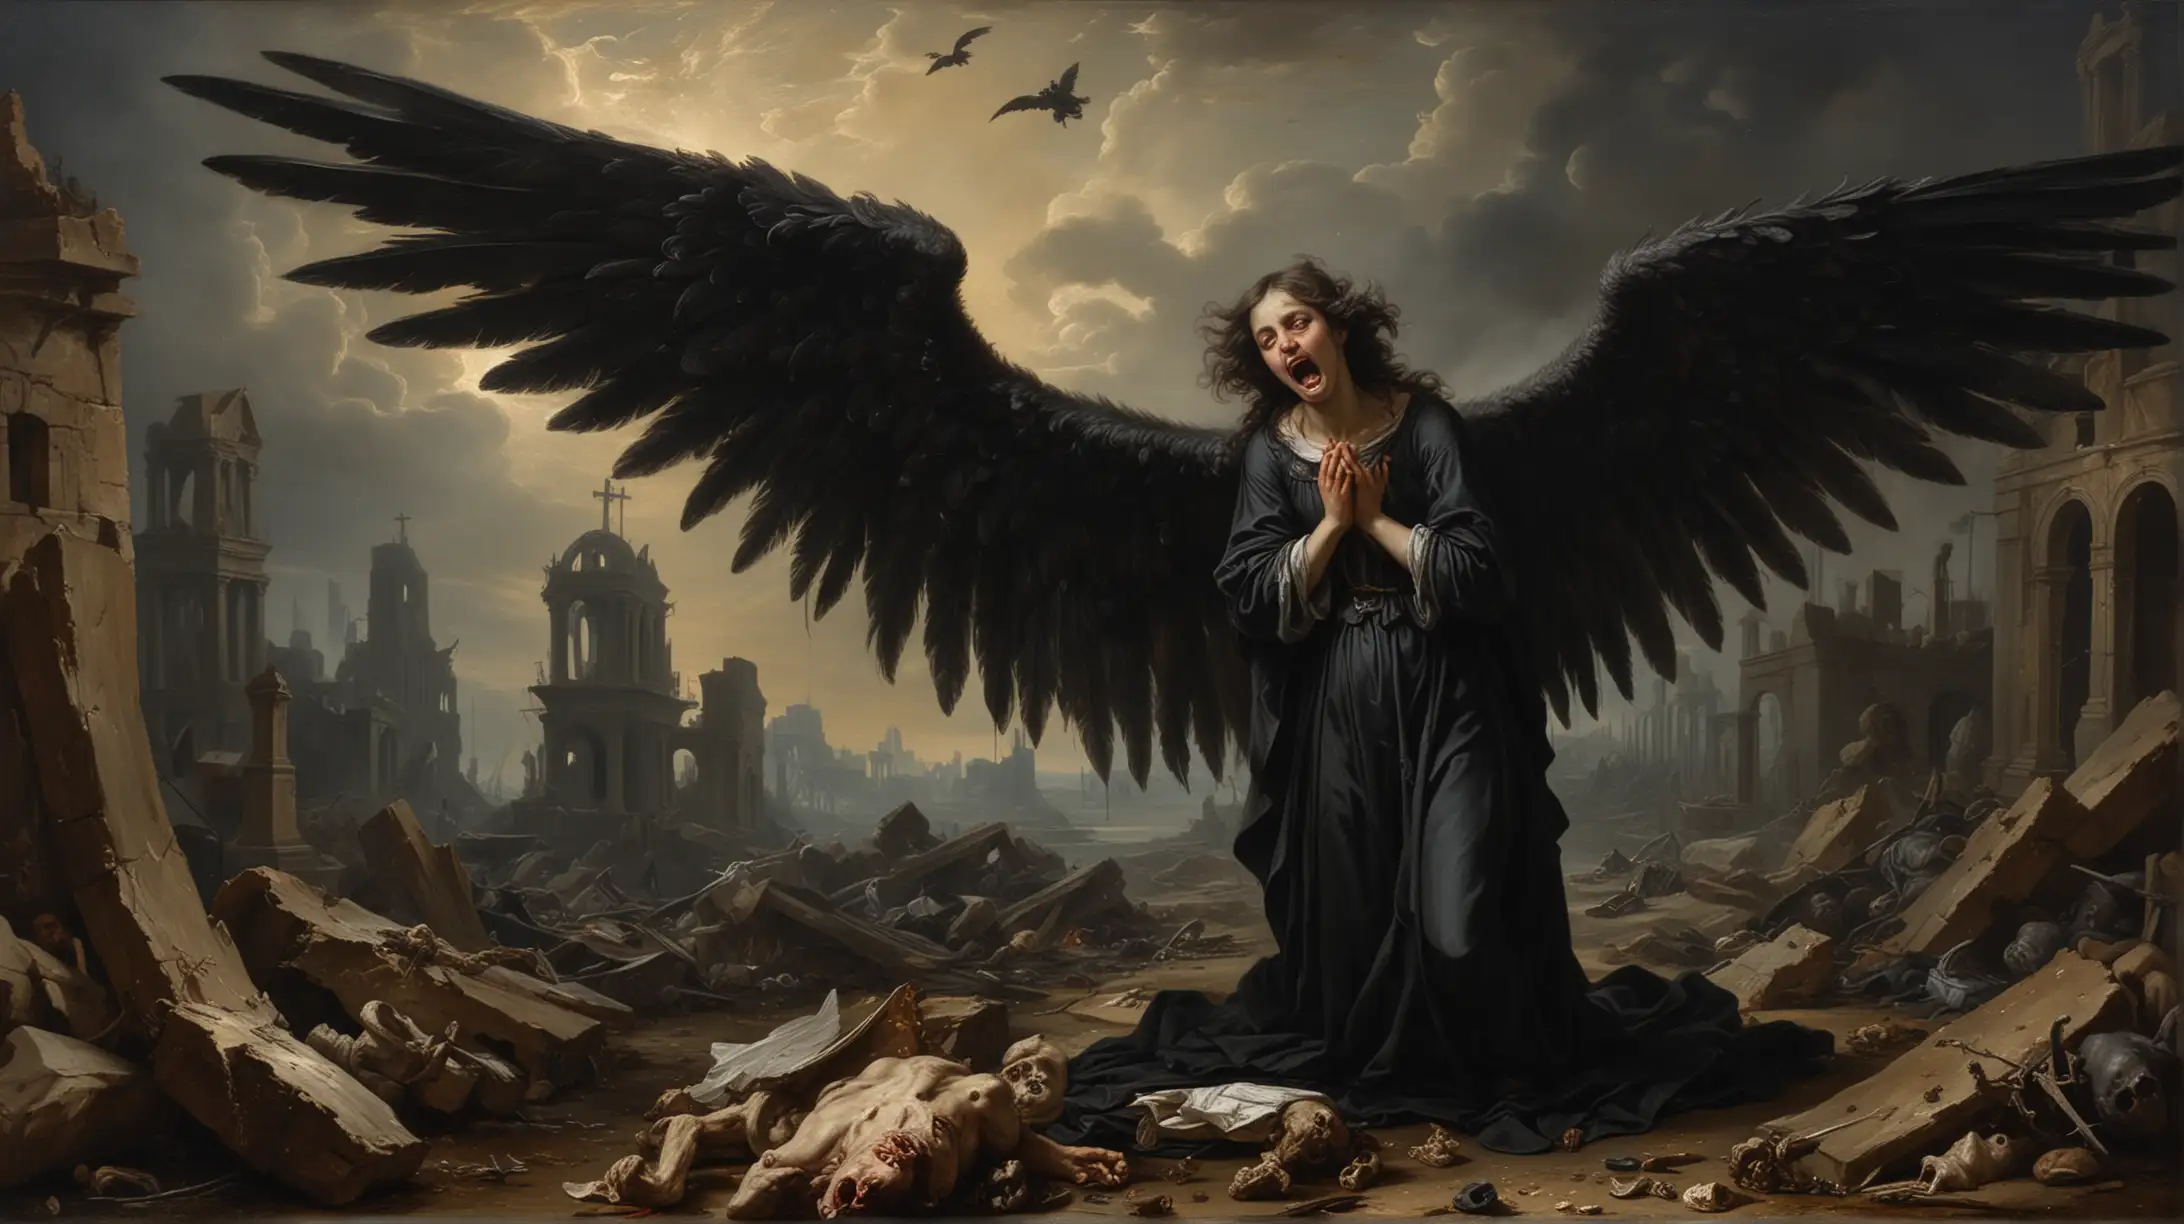 Distraught Black Angel with Spread Wings and Corpses in Ruined Landscape